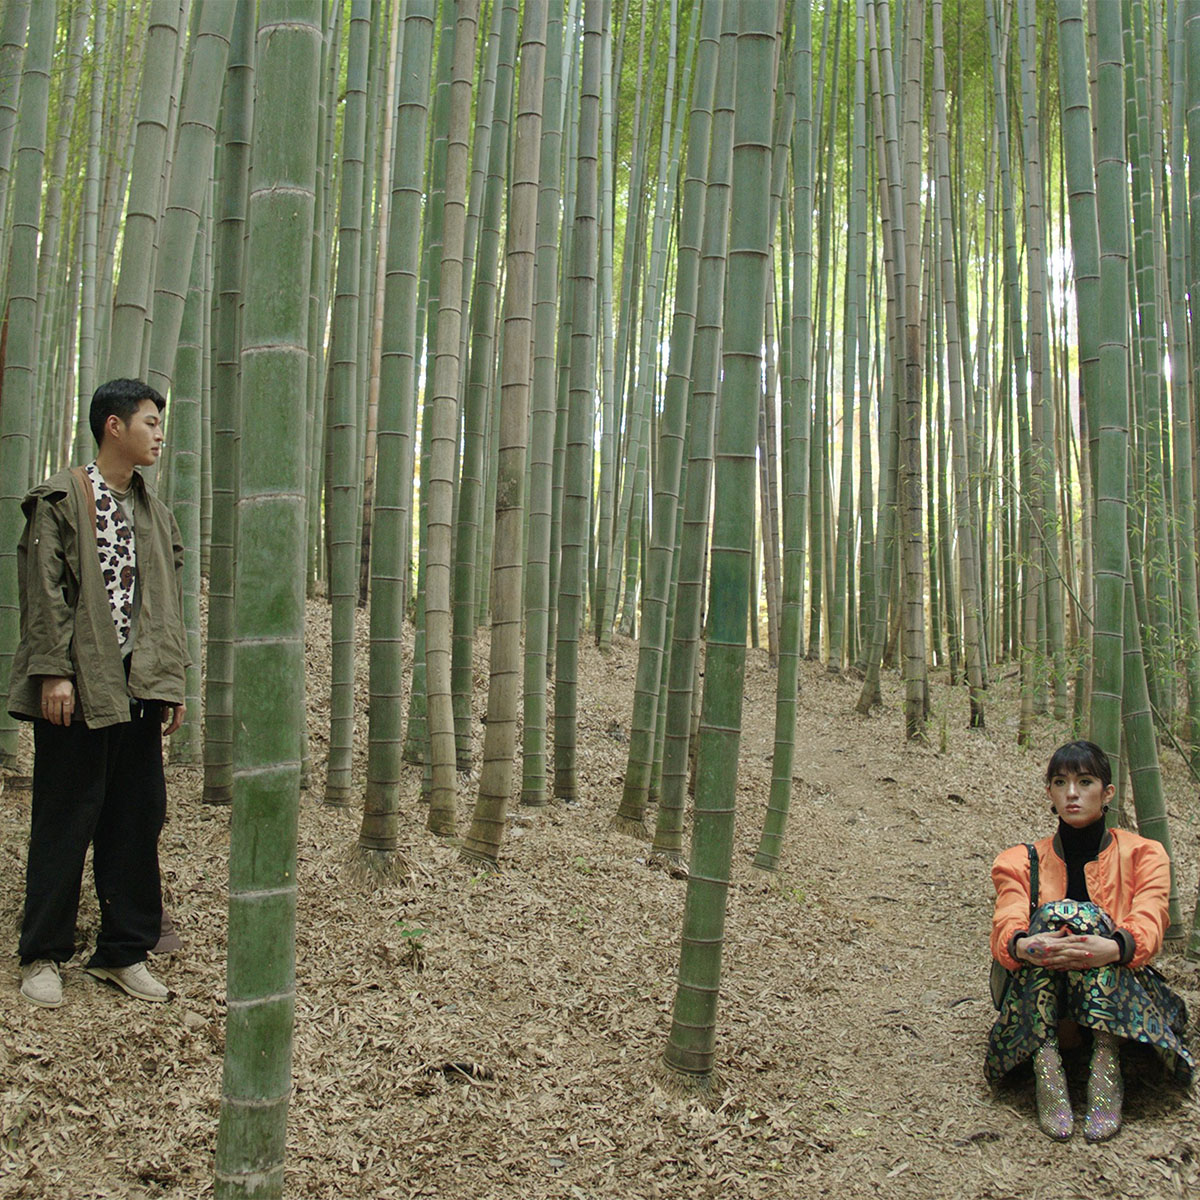 a man and a woman standing and sitting in a bamboo forest.